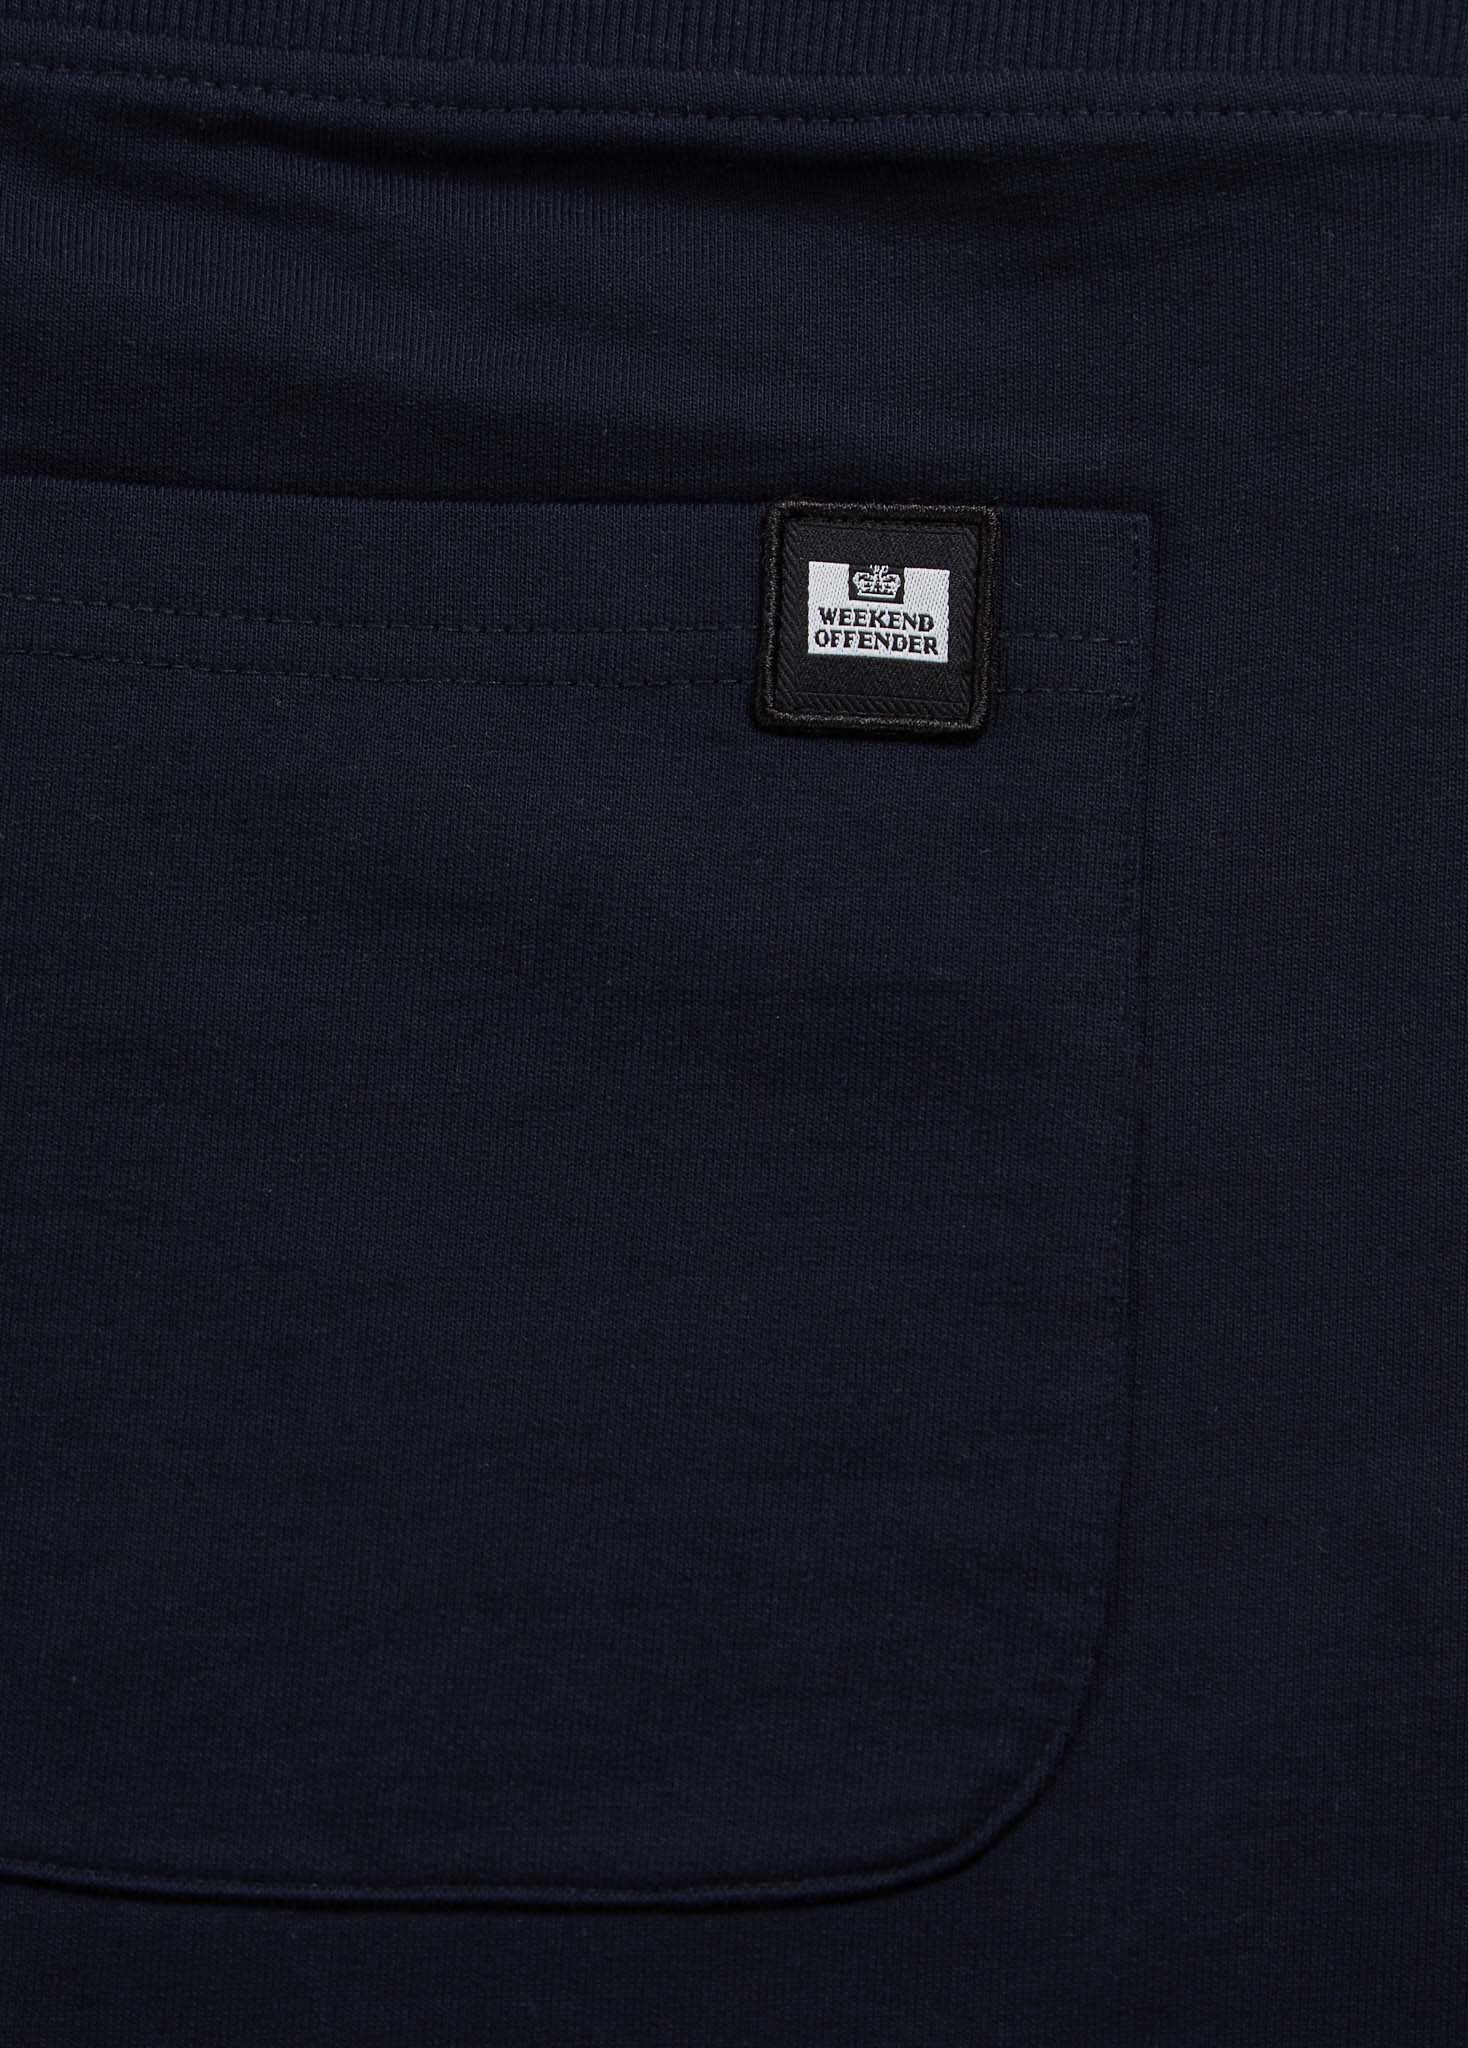 Action - navy - Weekend Offender